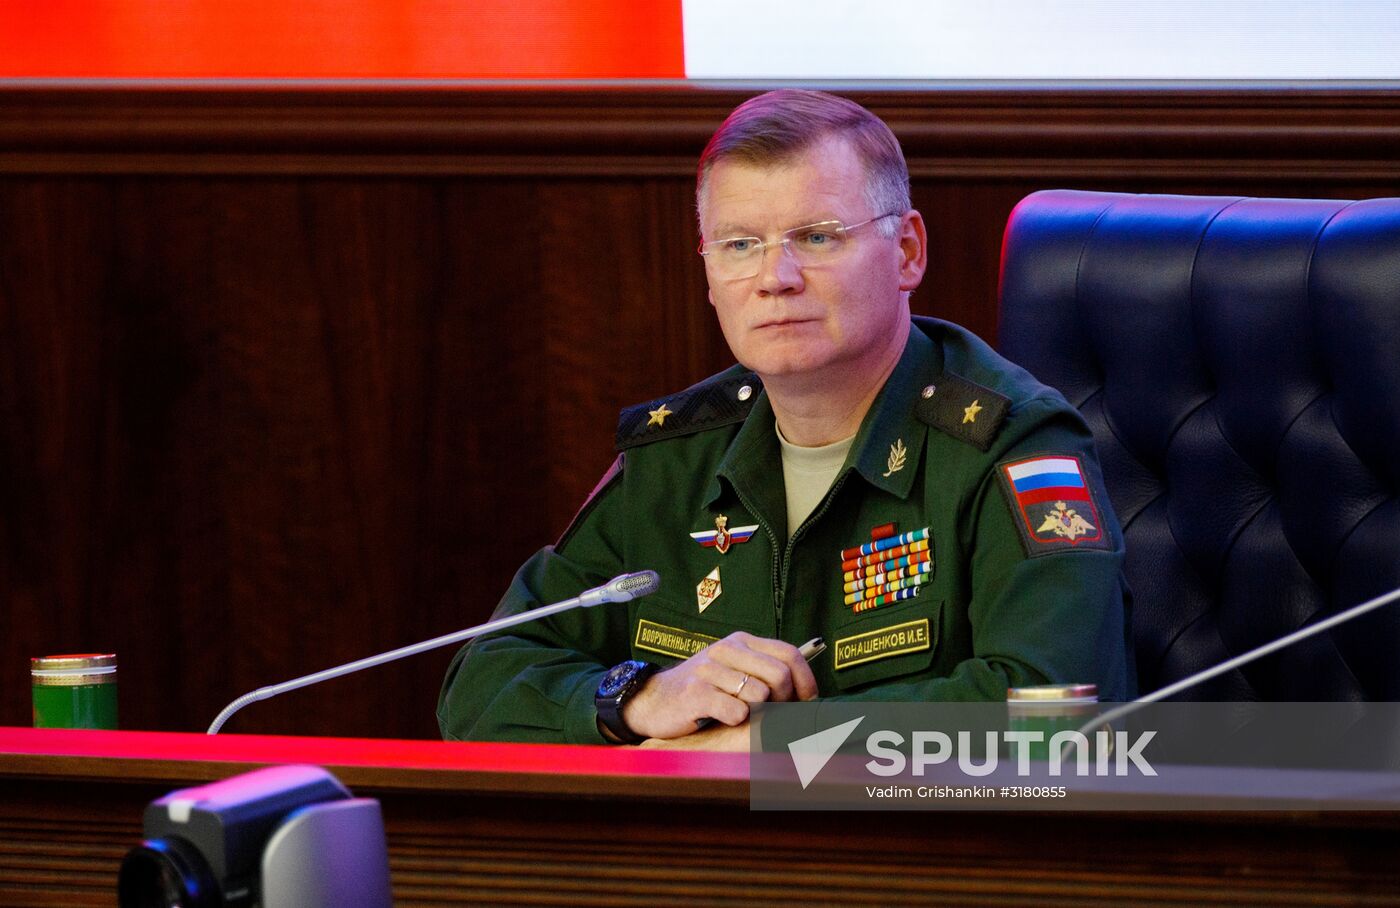 News conference following Army 2017 International Military-Technical Forum at Russian Defense Ministry